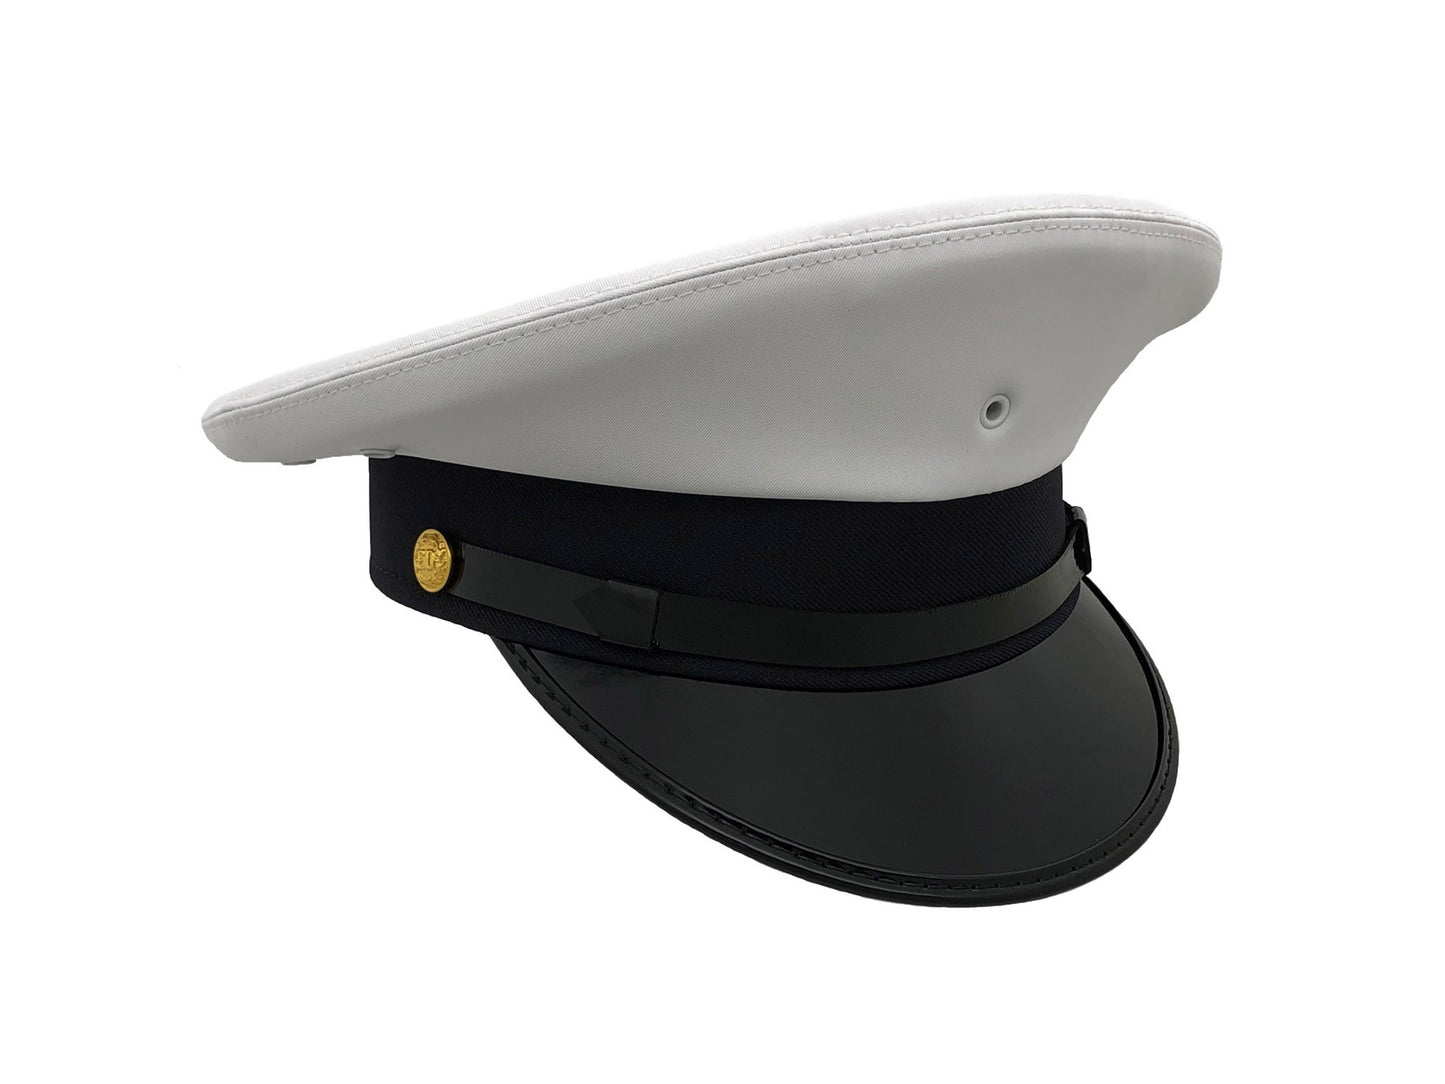 R-13W Air Force Round Top Cap with Serge Band